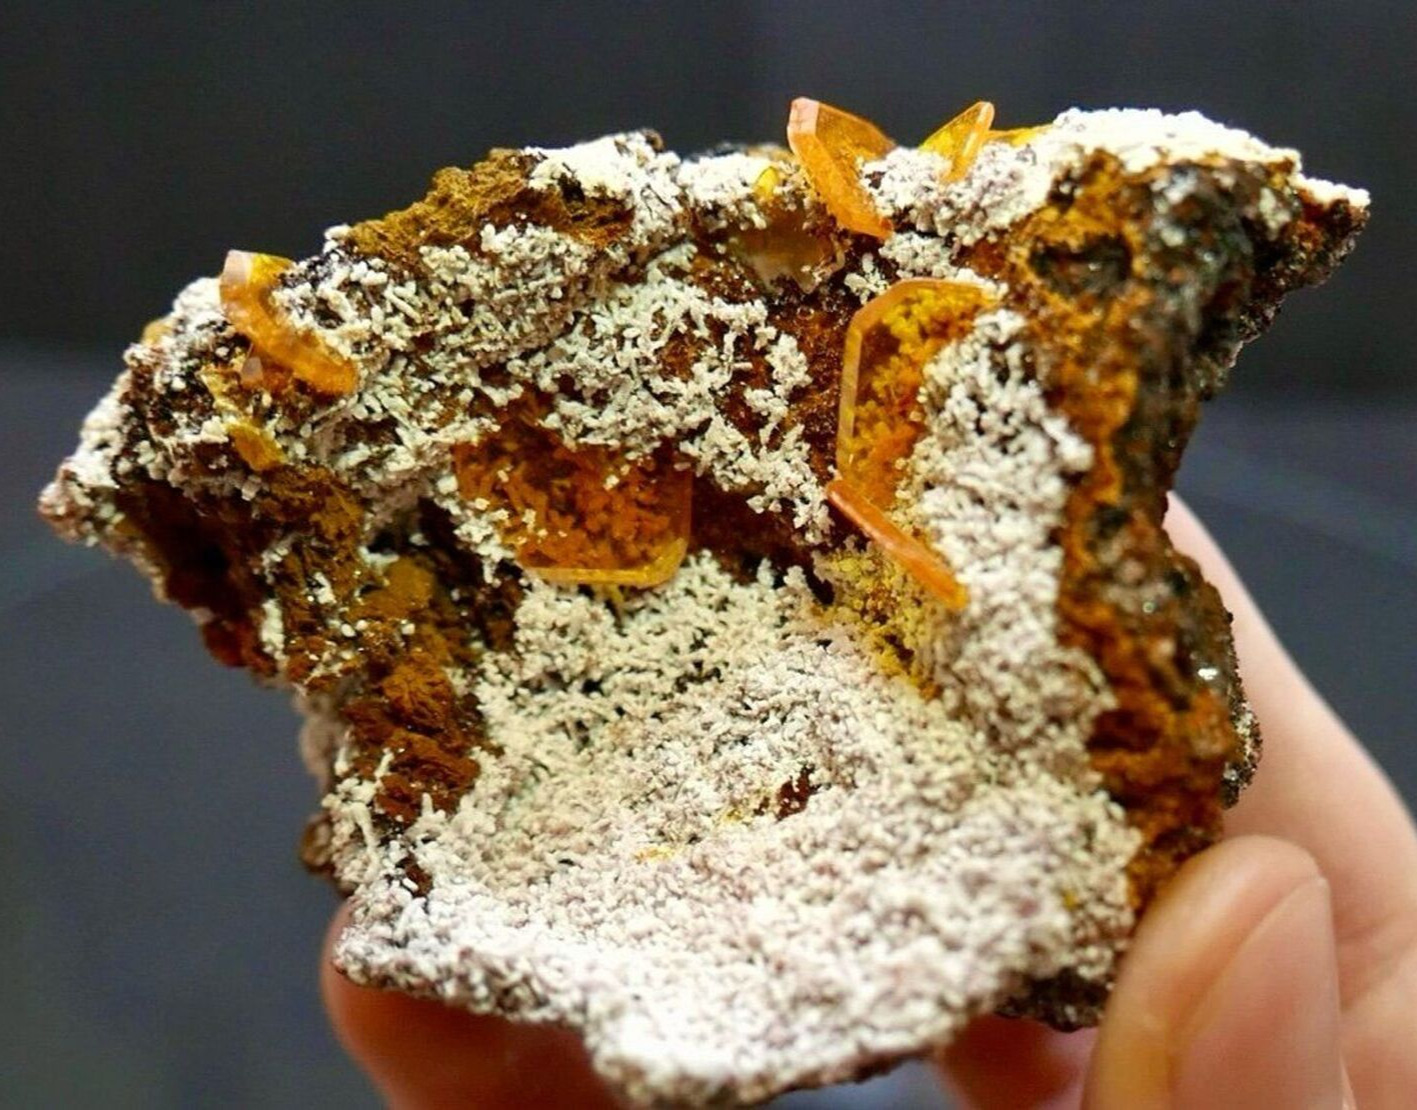 GEM Wulfenite with Calcite - Rare Old Find - Erupción Mine, Chihuahua, Mexico